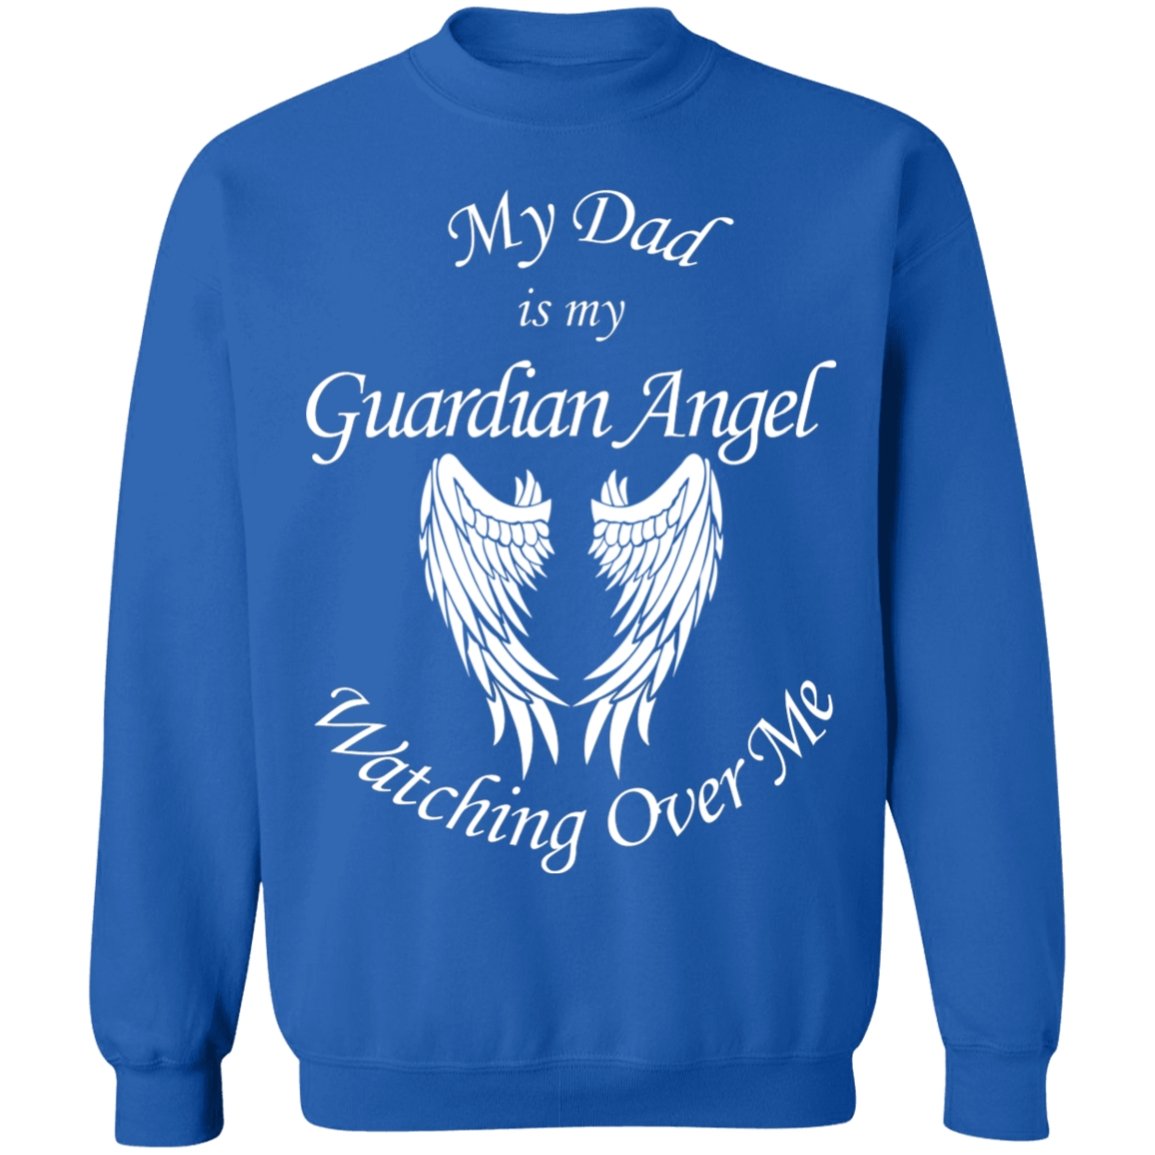 Dad is my Guardian Angel Watching Over Me Sweatshirt | Sweatshirt | American Greatness, american made, christmas gifts, gift for dad, gifts, gifts for men, made in usa, sweatshirt, sweatshirts, usa, usa apparel, usa made | TageUnlimited